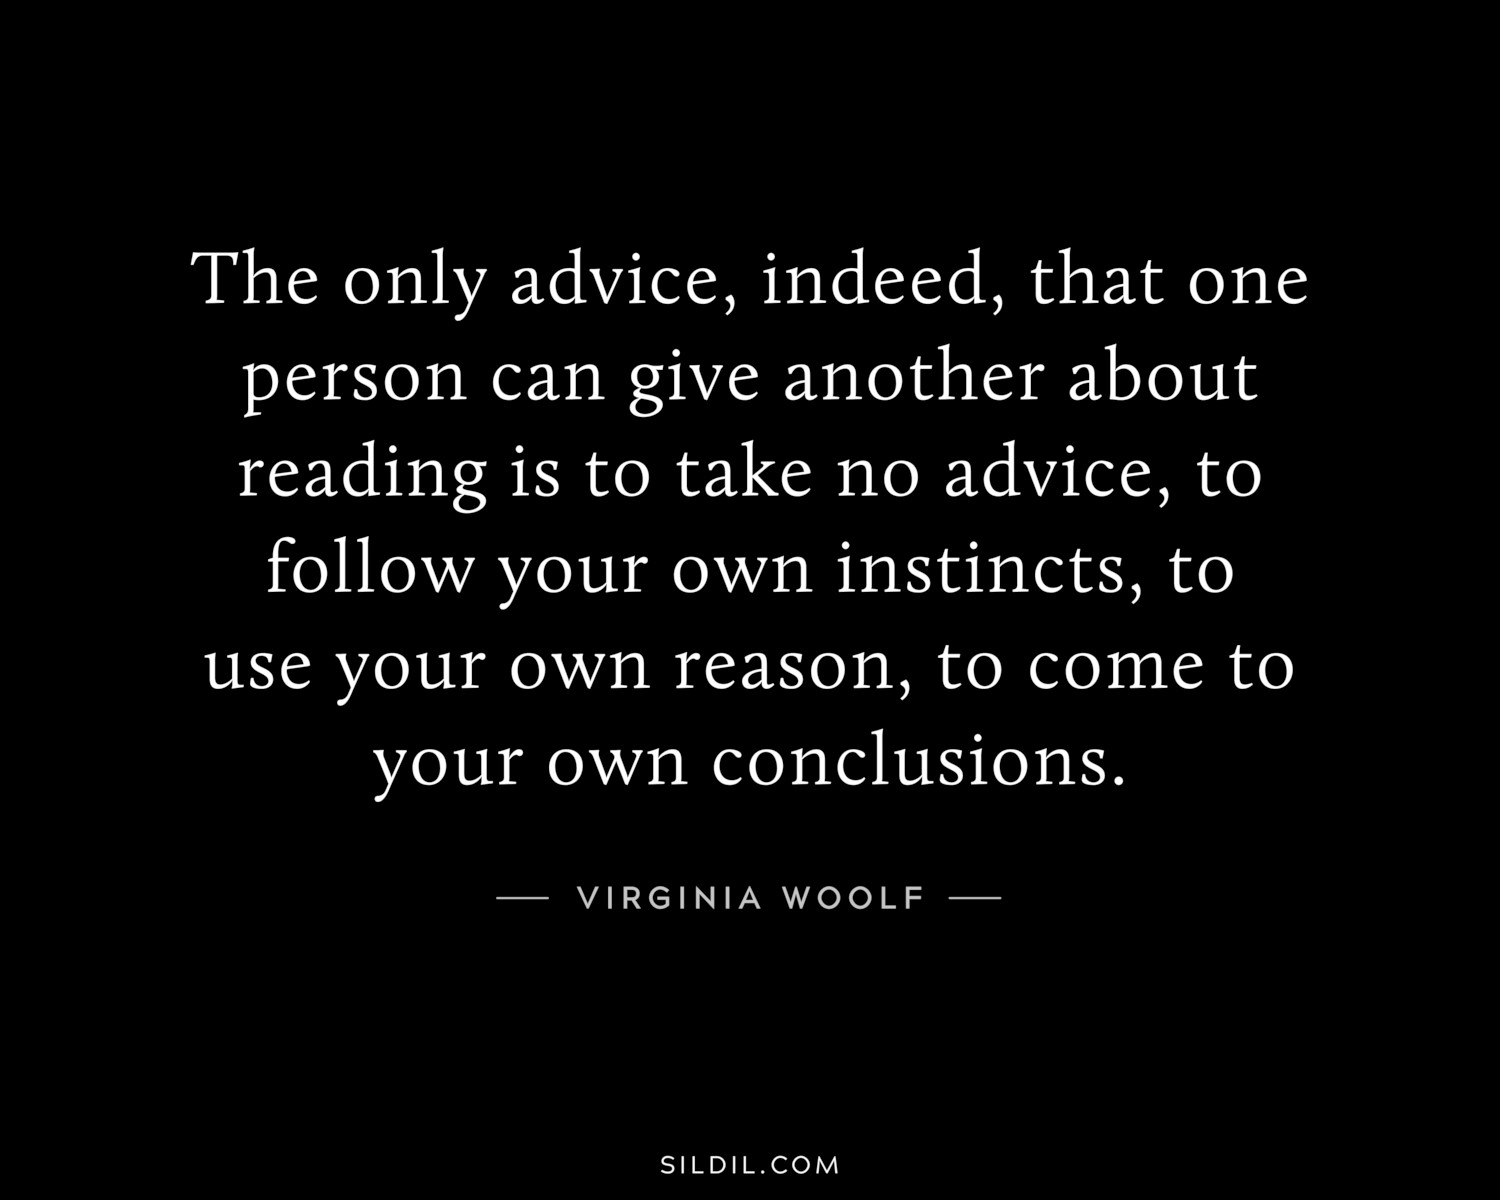 The only advice, indeed, that one person can give another about reading is to take no advice, to follow your own instincts, to use your own reason, to come to your own conclusions.